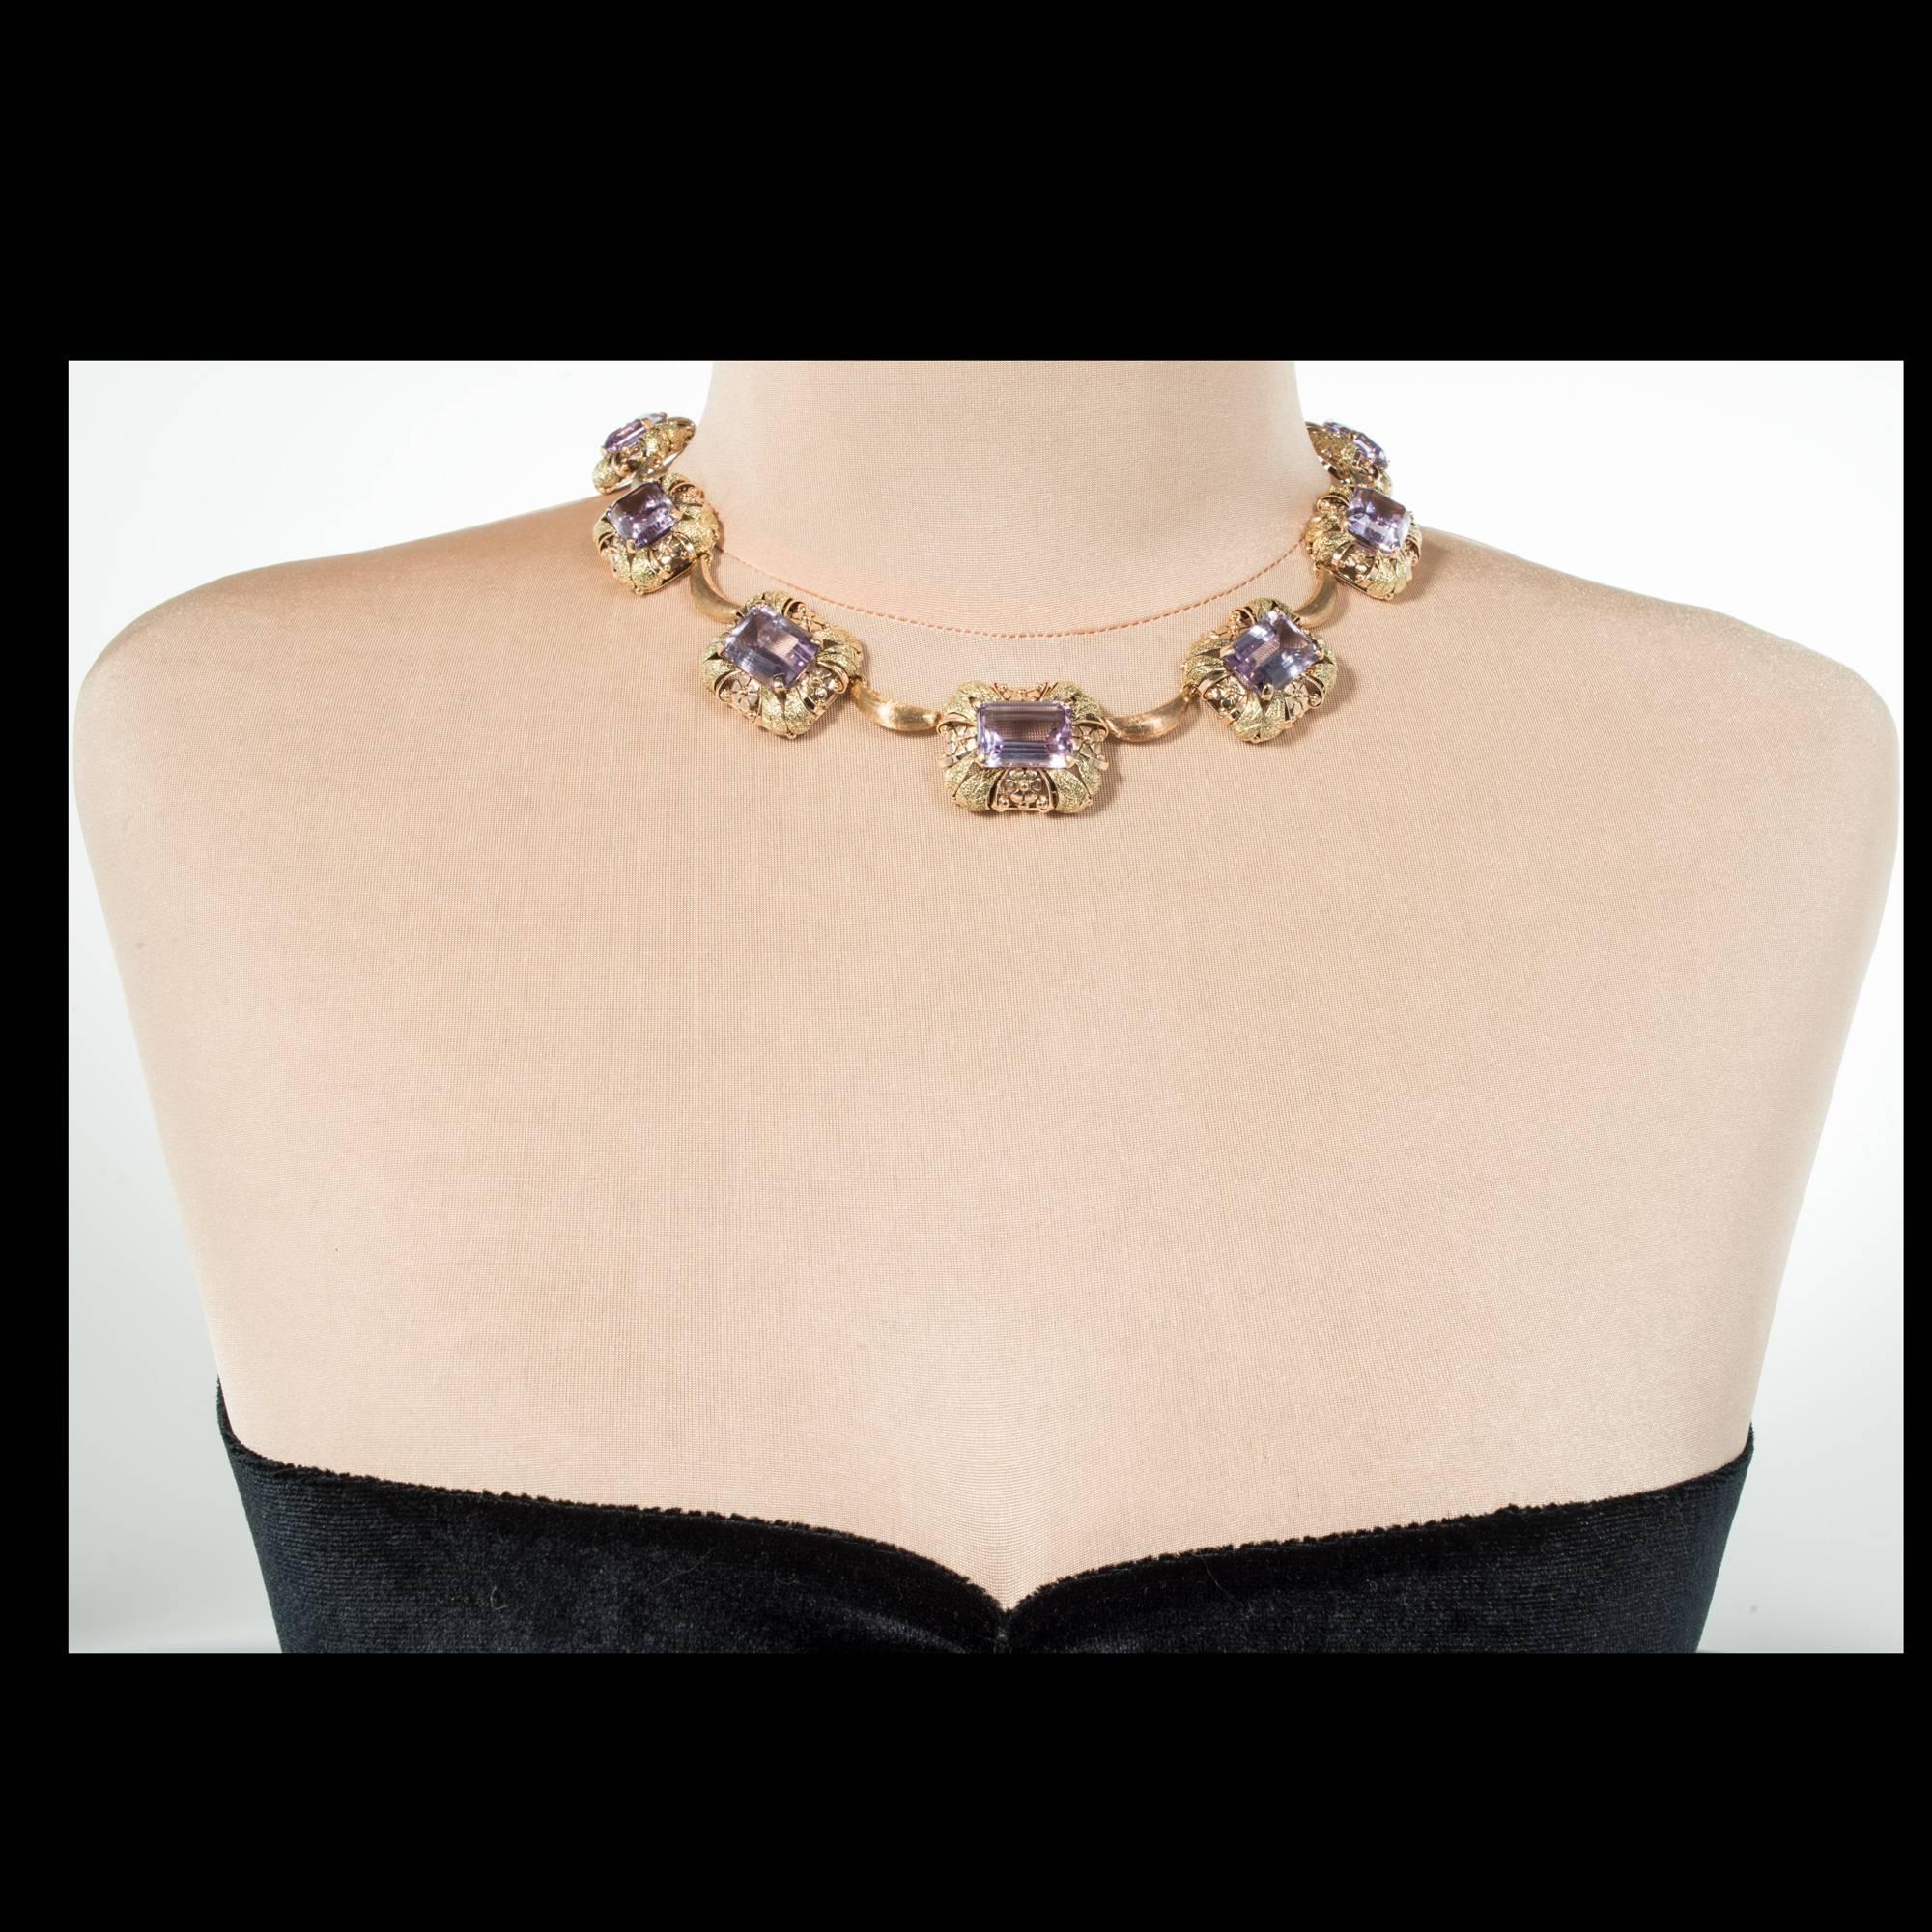 Handmade amethyst rose and green gold 10 section necklace. Hand formed and engraved flower motif 3-D sections connected by curved bars. Set with 10 genuine Emerald cut Amethyst GIA certified as natural, the GIA certificate refers to Amethyst today